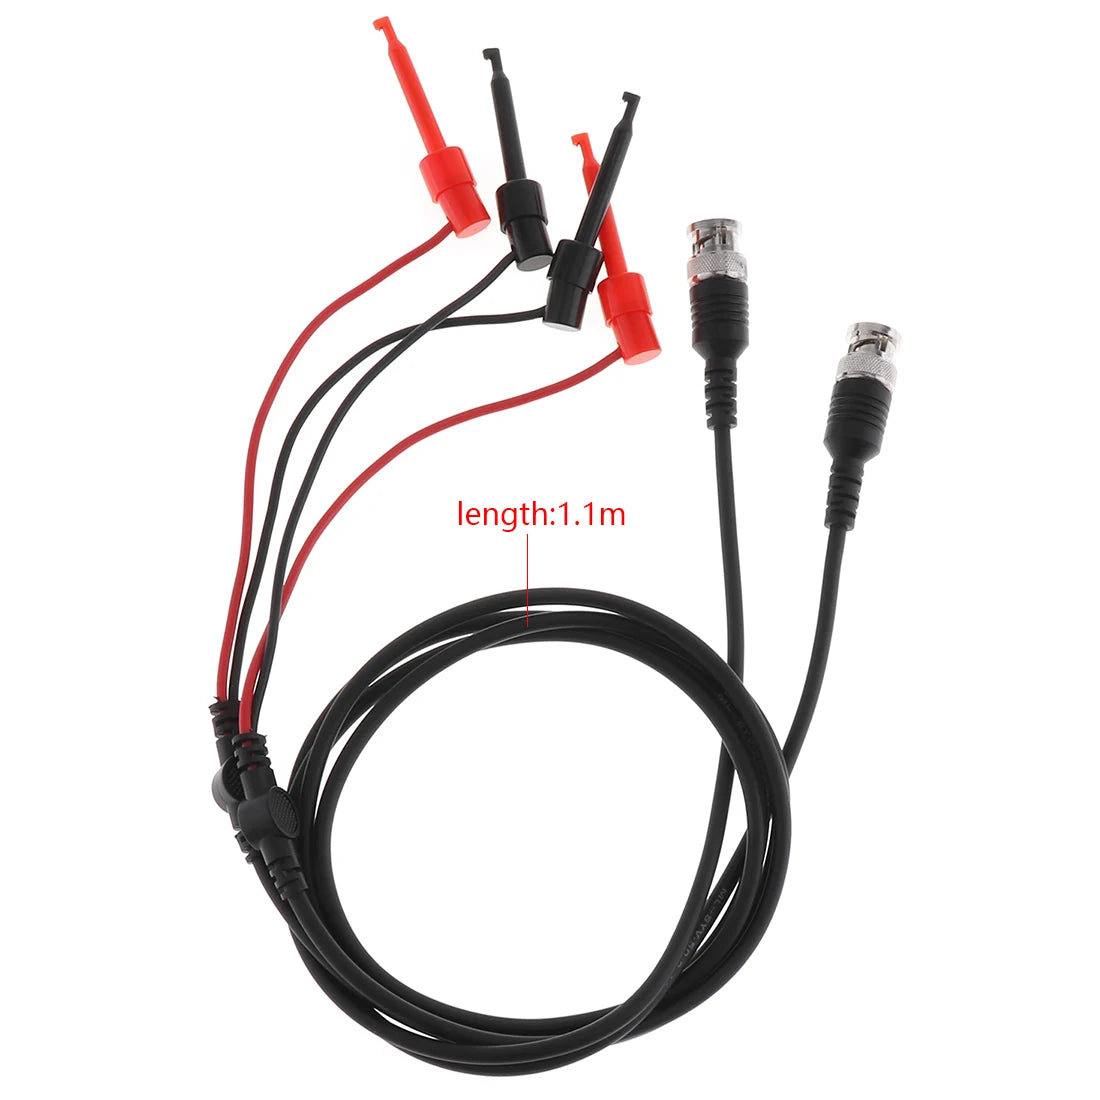 2pcs/lot BNC Male Plug Q9 to Dual Testing Hook Clip Test Leads Probe Coaxial Cable Line